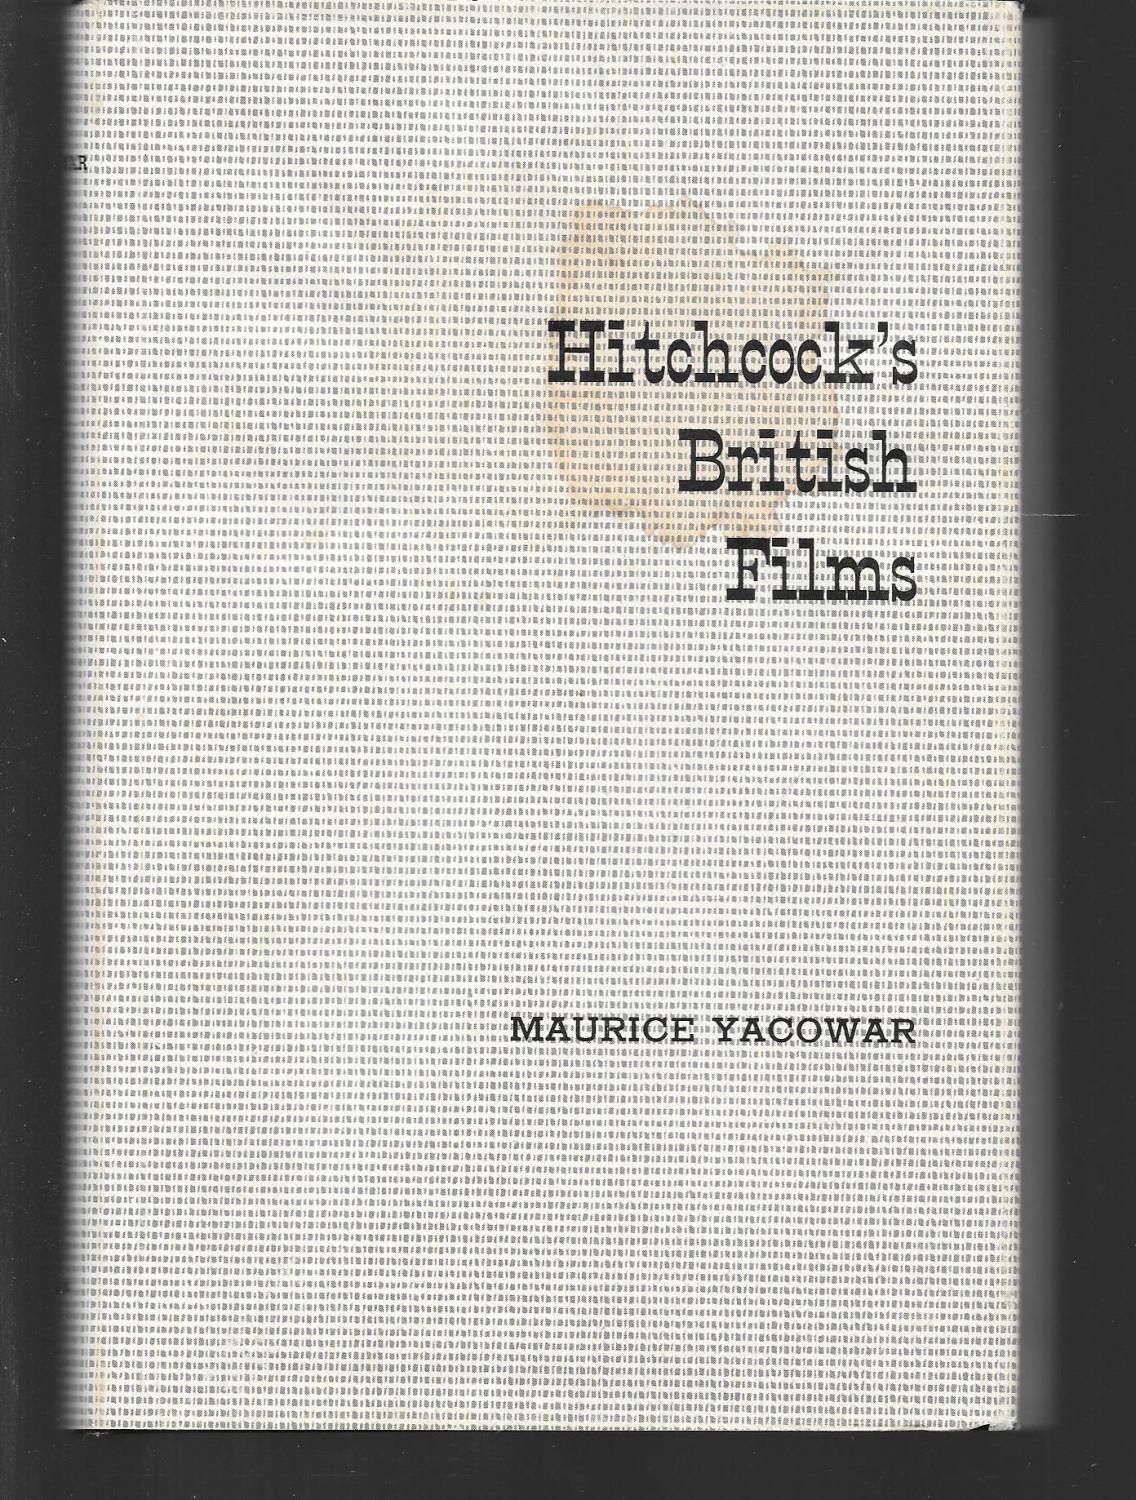 hitchcock's british films - maurice yacowar ( alfred hitchcock )